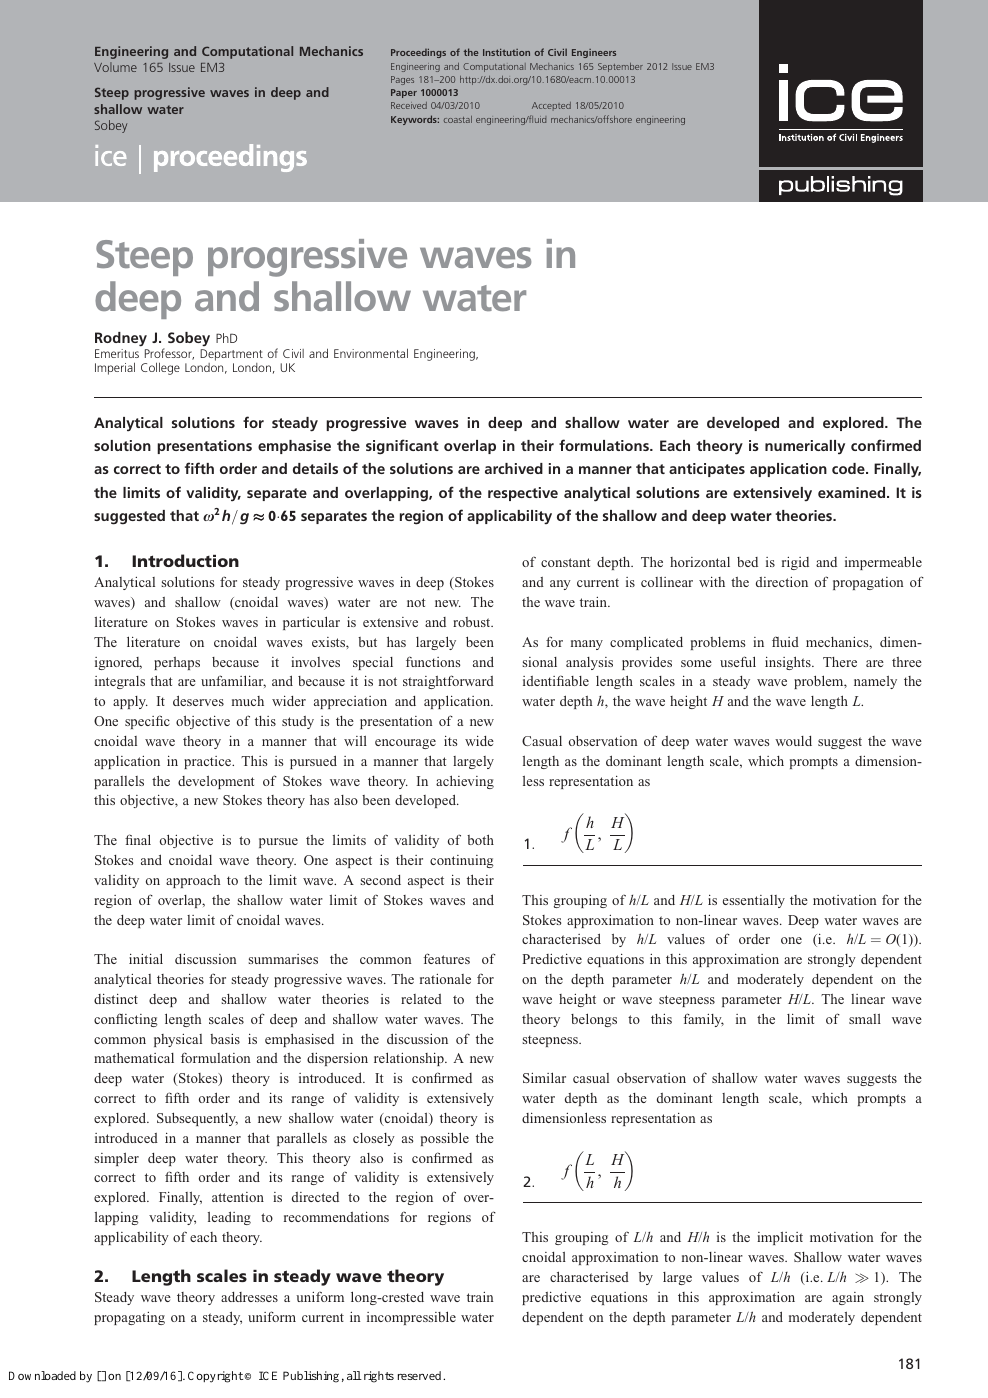 Steep Progressive Waves In Deep And Shallow Water Topic Of Research Paper In Earth And Related Environmental Sciences Download Scholarly Article Pdf And Read For Free On Cyberleninka Open Science Hub